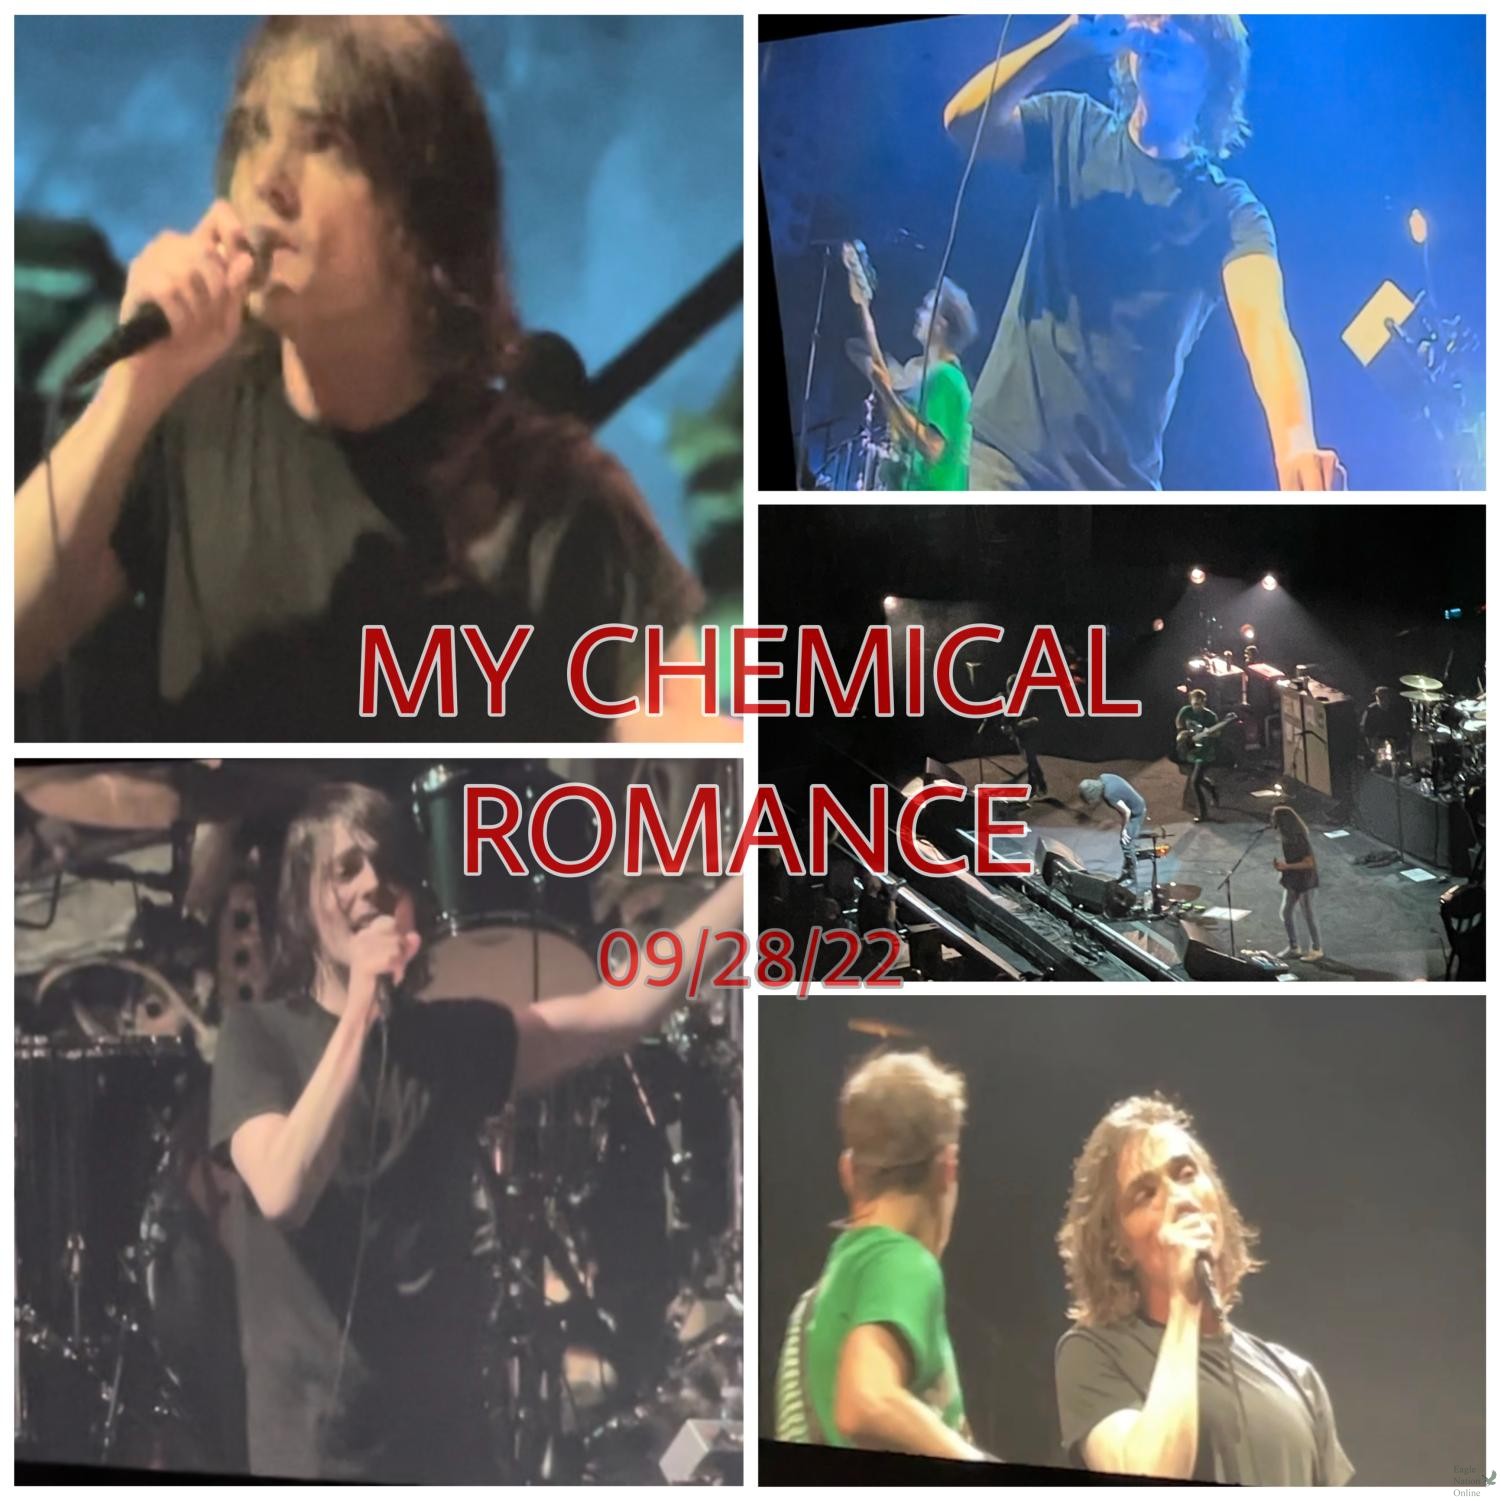 Is My Chemical Romance still together?